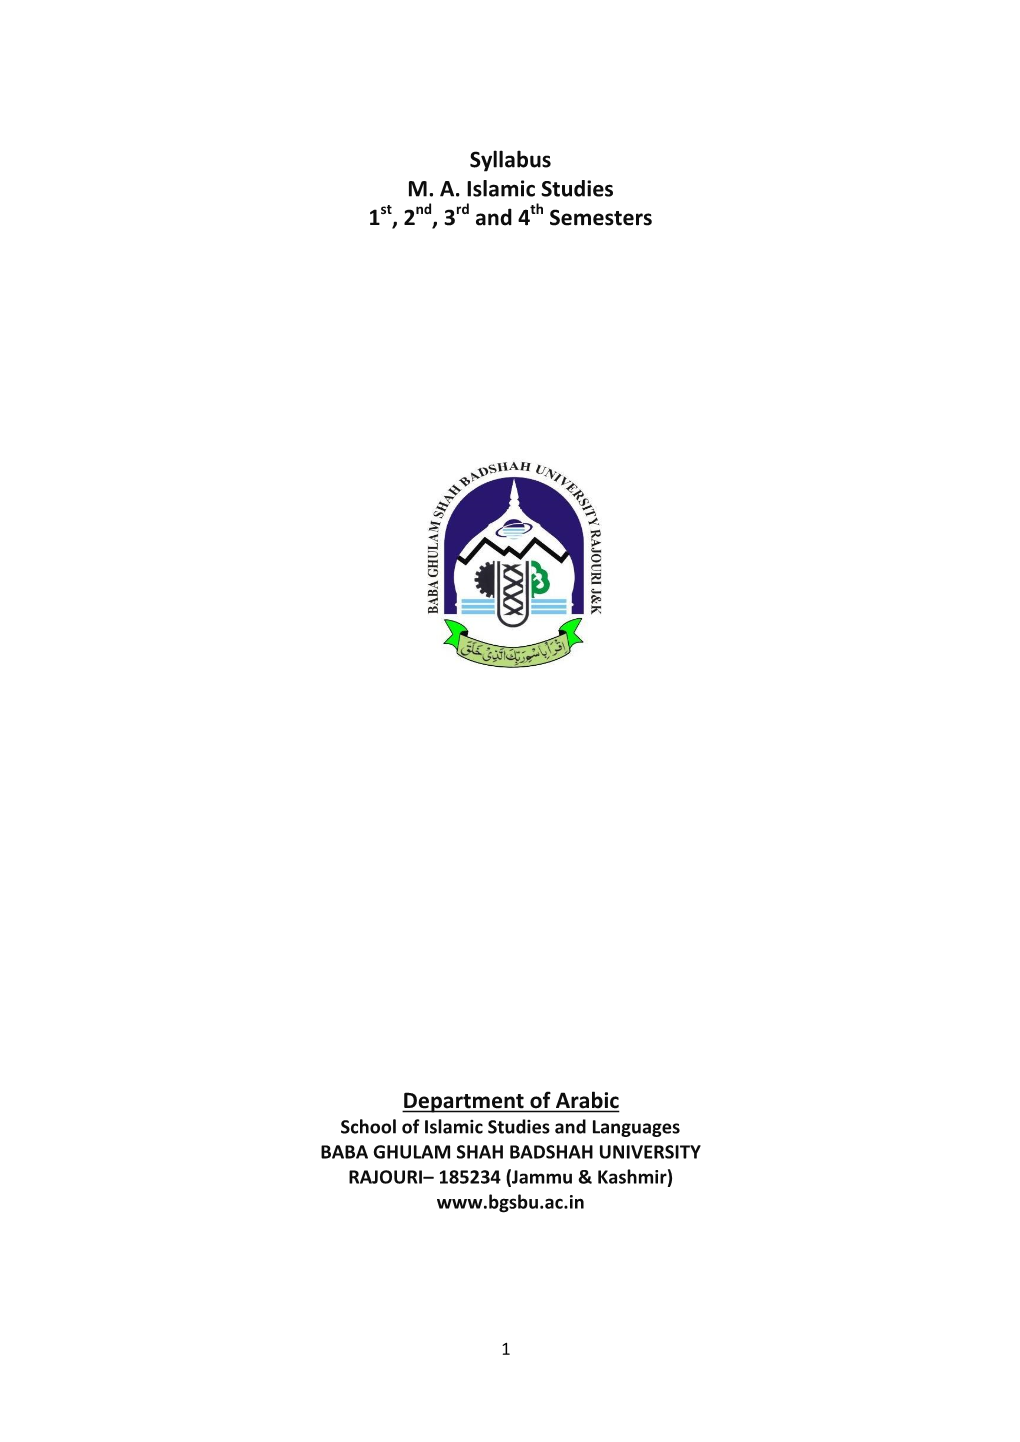 Syllabus M. A. Islamic Studies 1 , 2 , 3 and 4 Semesters Department Of